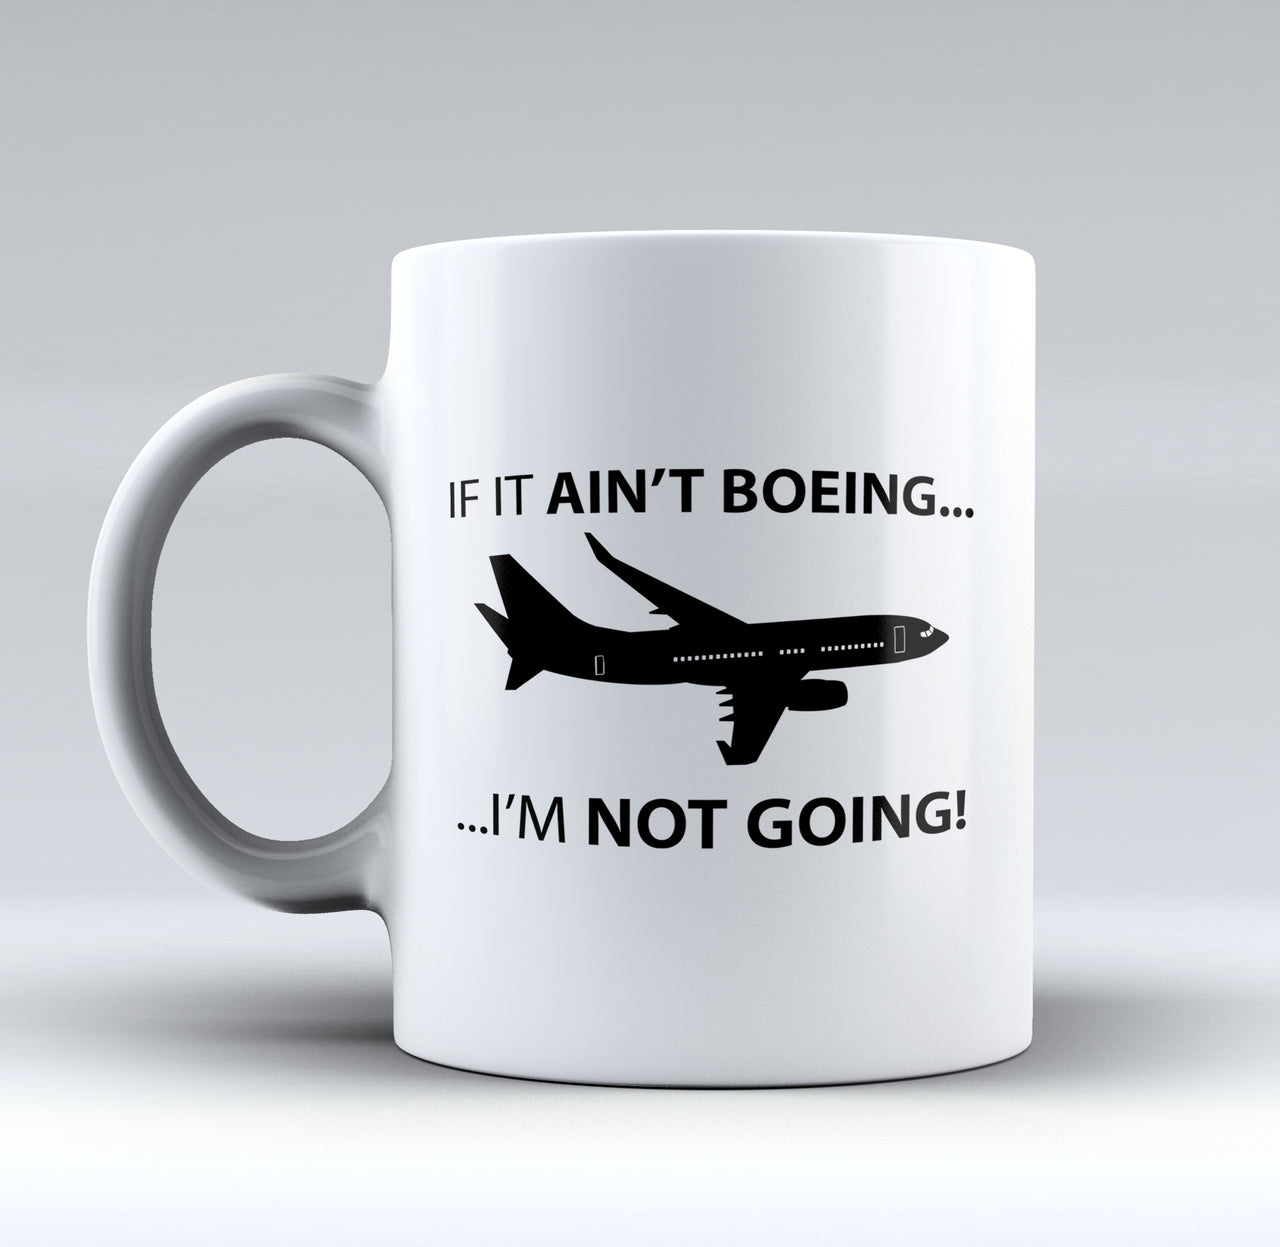 If It Ain't Boeing I'm Not Going! Designed Mugs